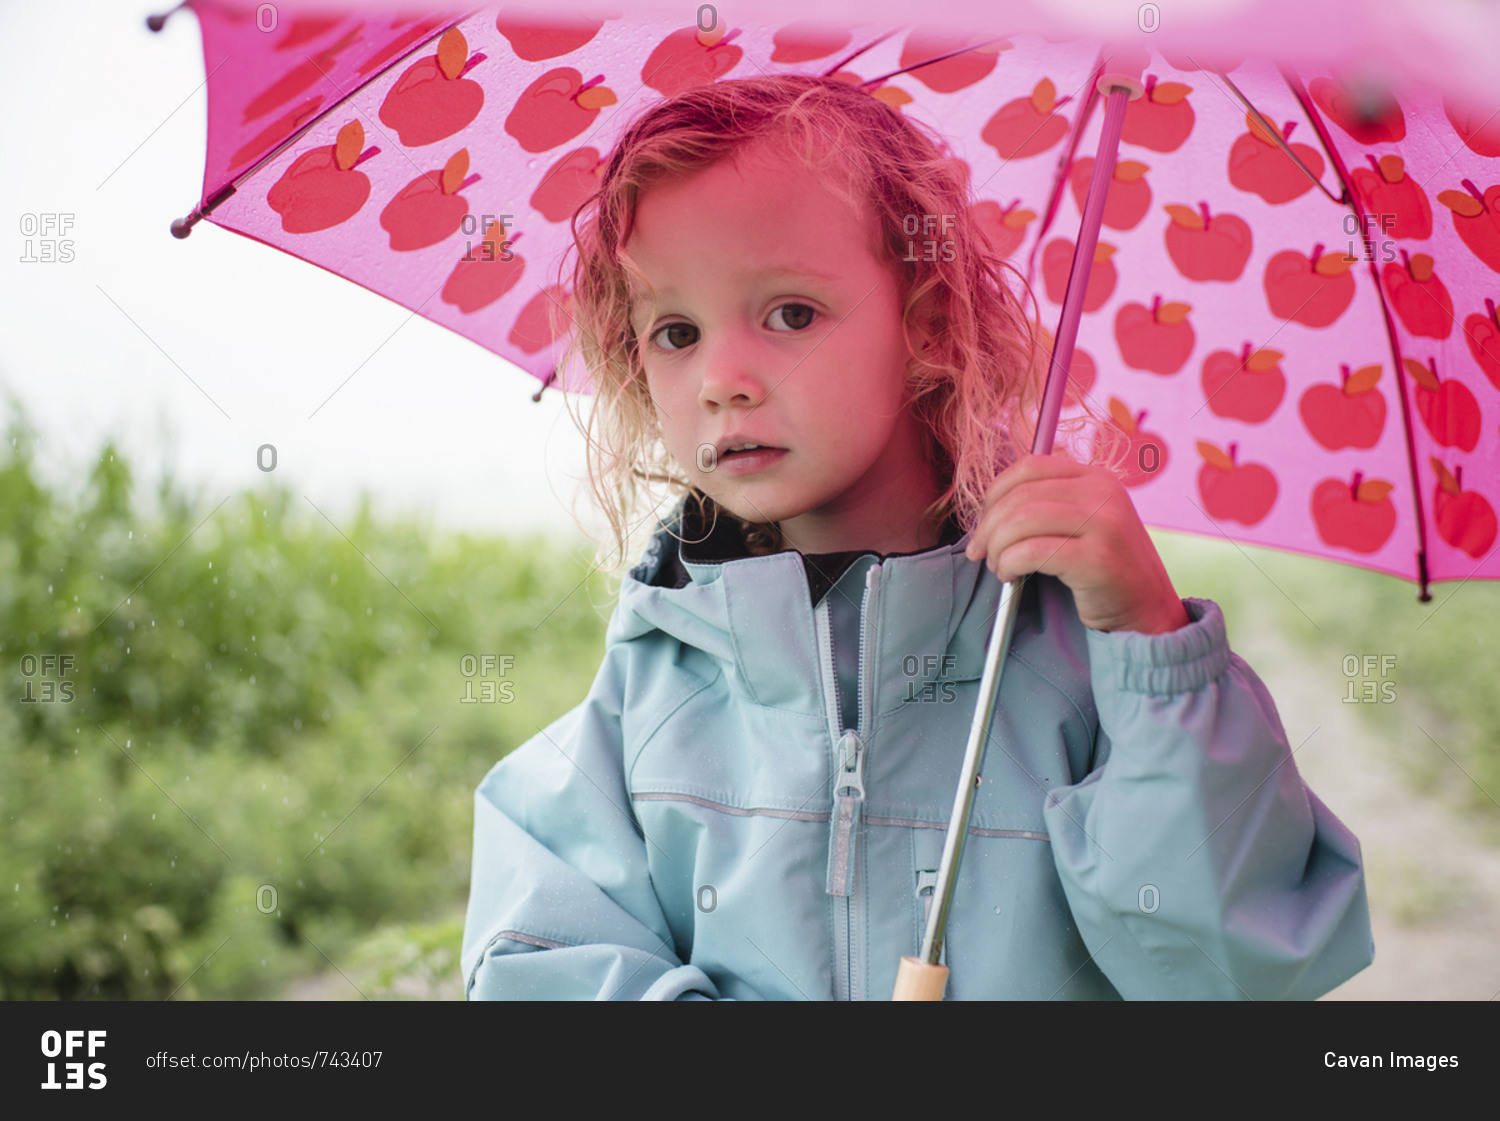 Portrait of cute girl carrying pink umbrella while standing against plants during rainy season